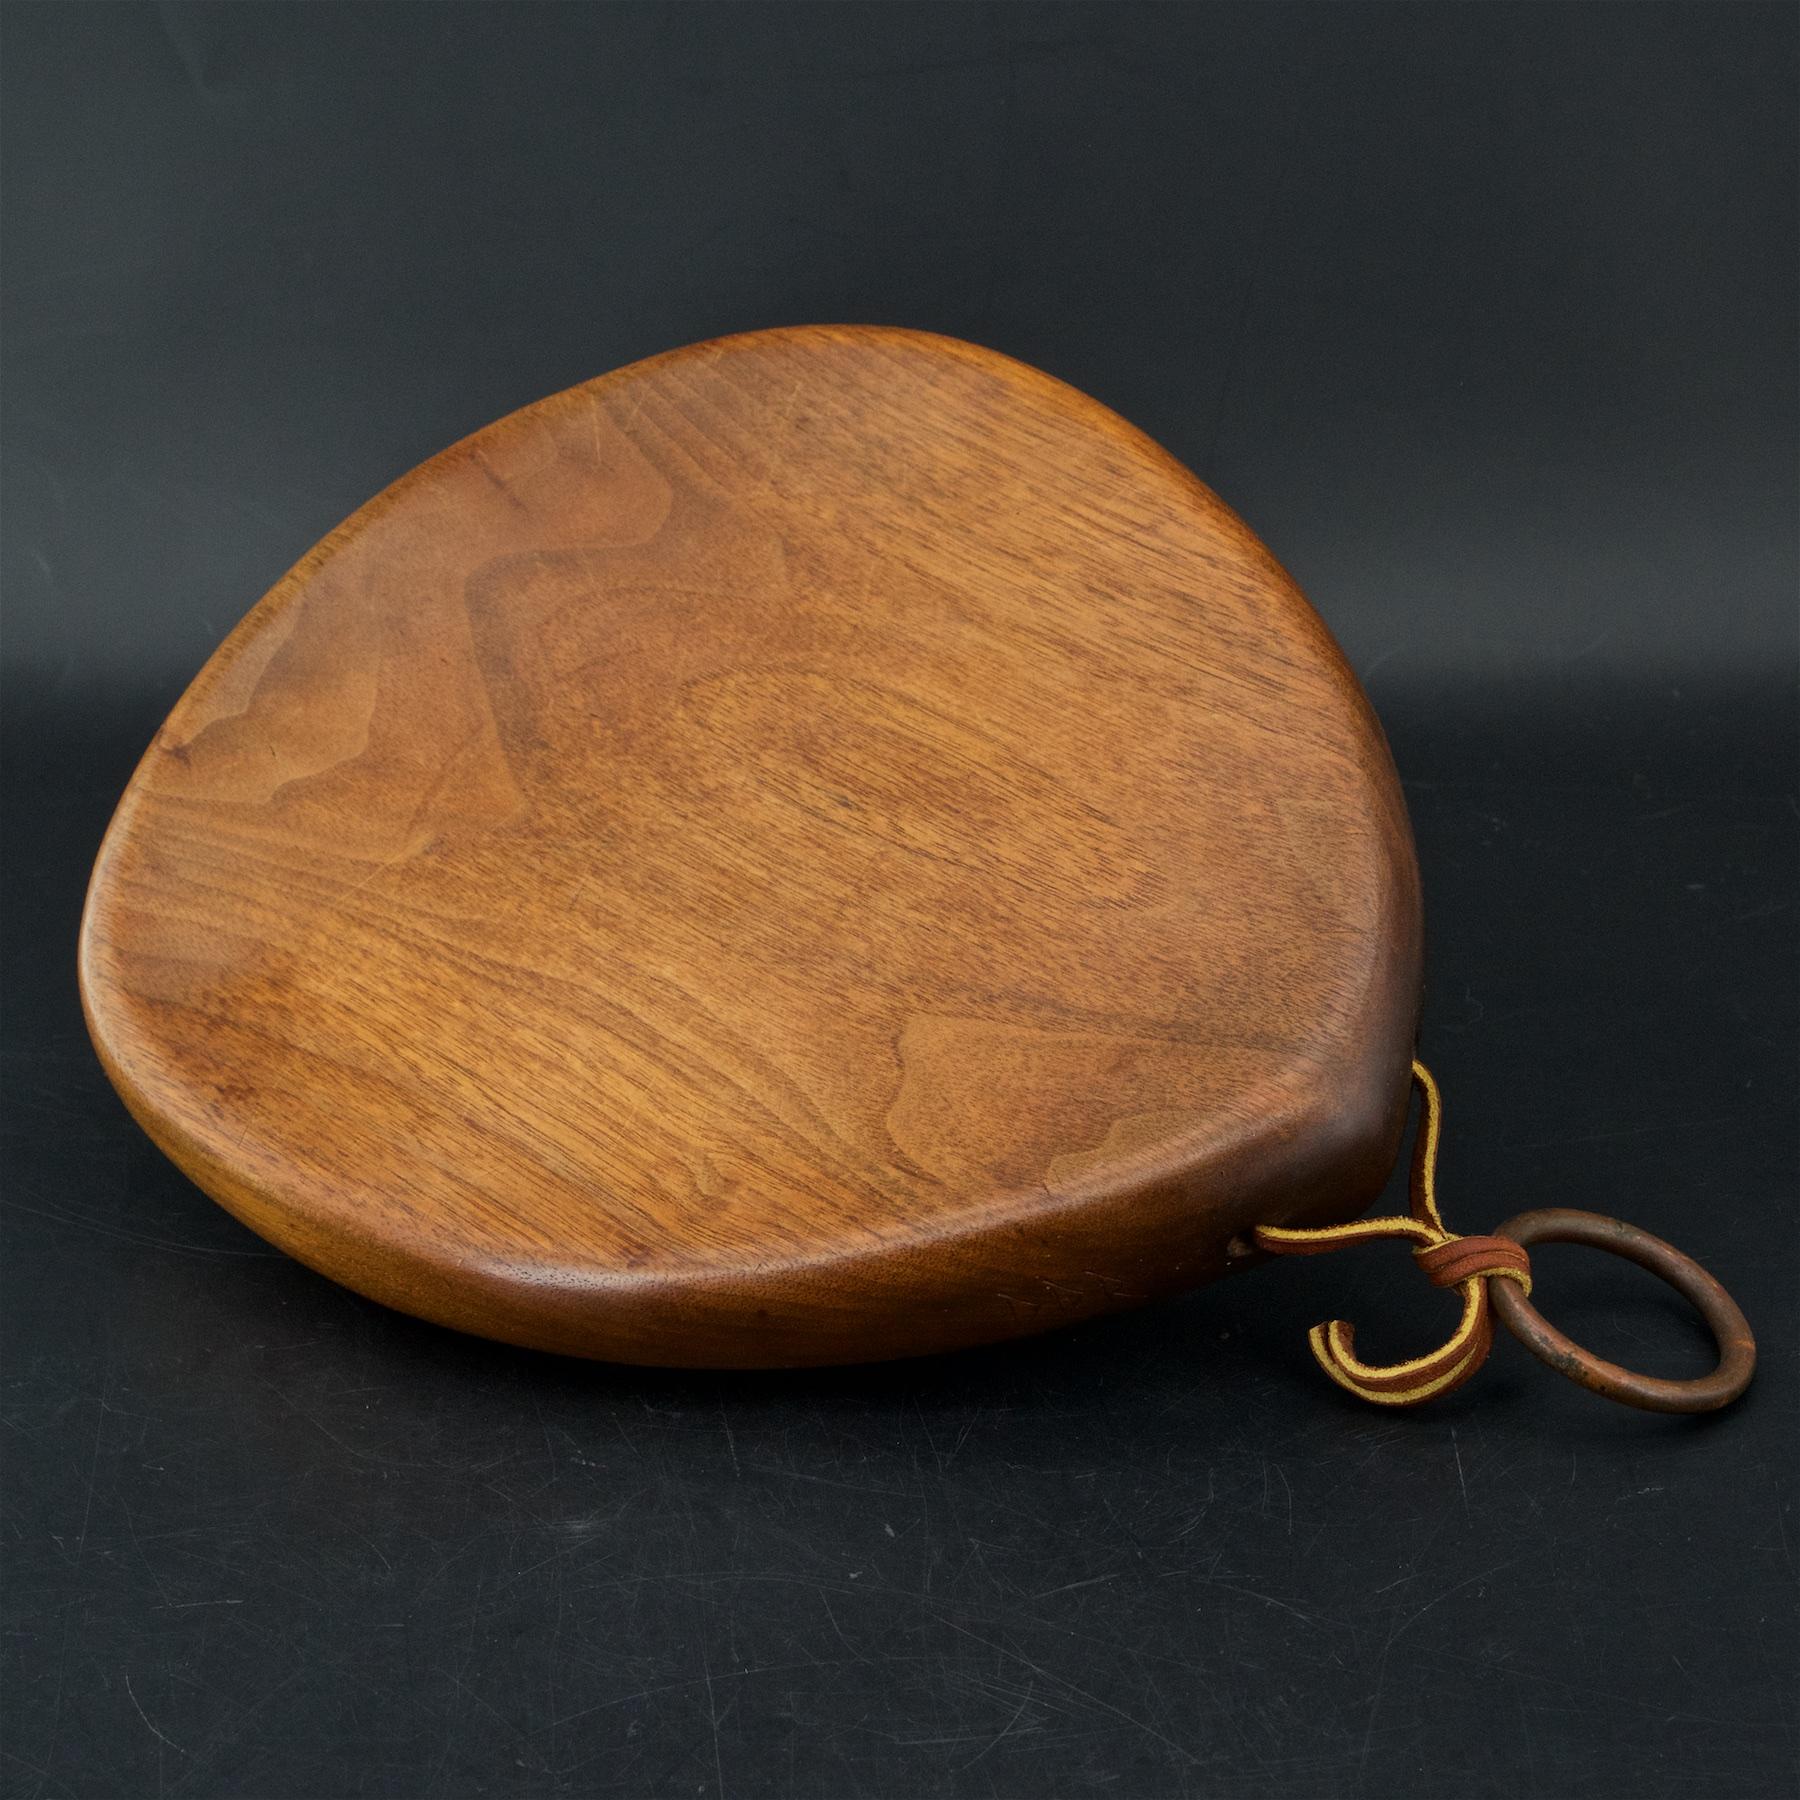 Modernist tear drop form. Dirk Rosse (1925-2014) was an exhibited studio furniture maker. Cutting board in walnut, signed with his DDR mark to edge. 13 inches in length total when hung on wall with brass ring.